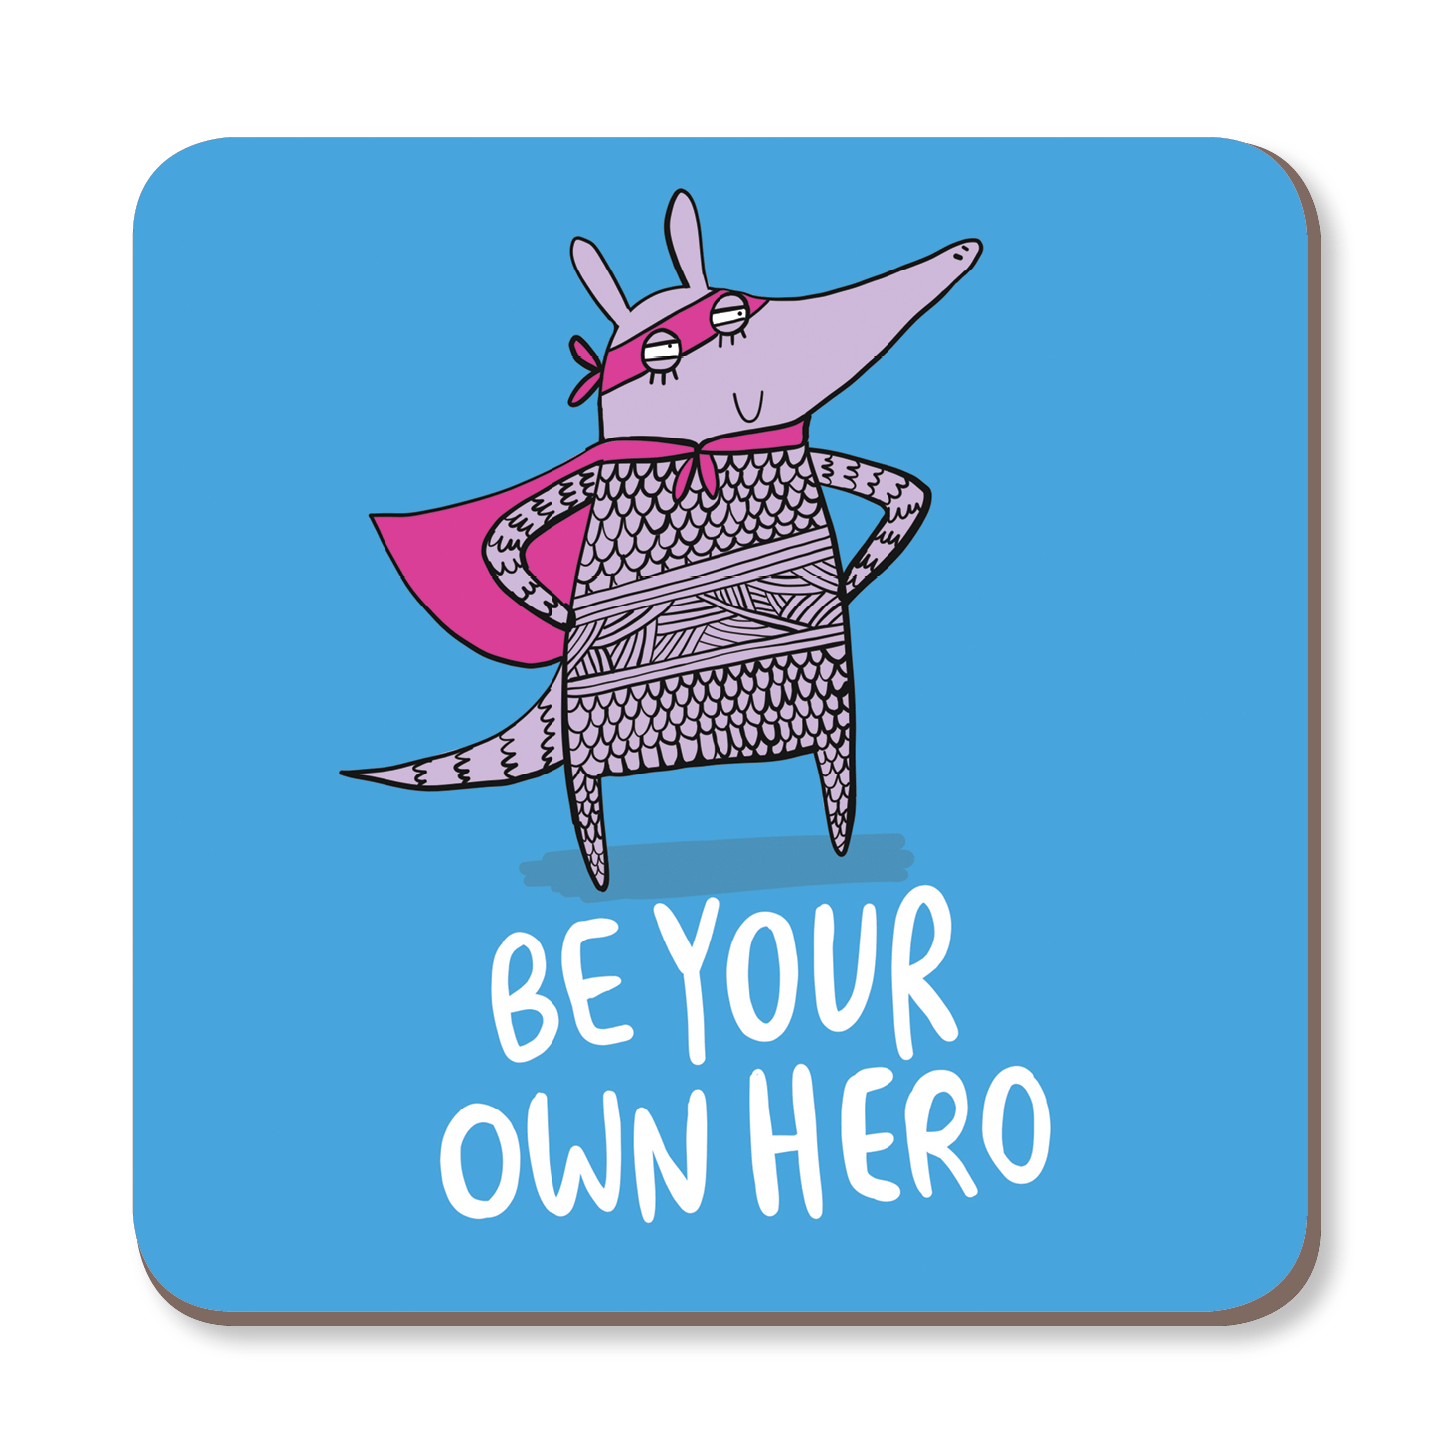 Be Your Own Hero Motivational Coaster by Katie Abey - Whale and Bird